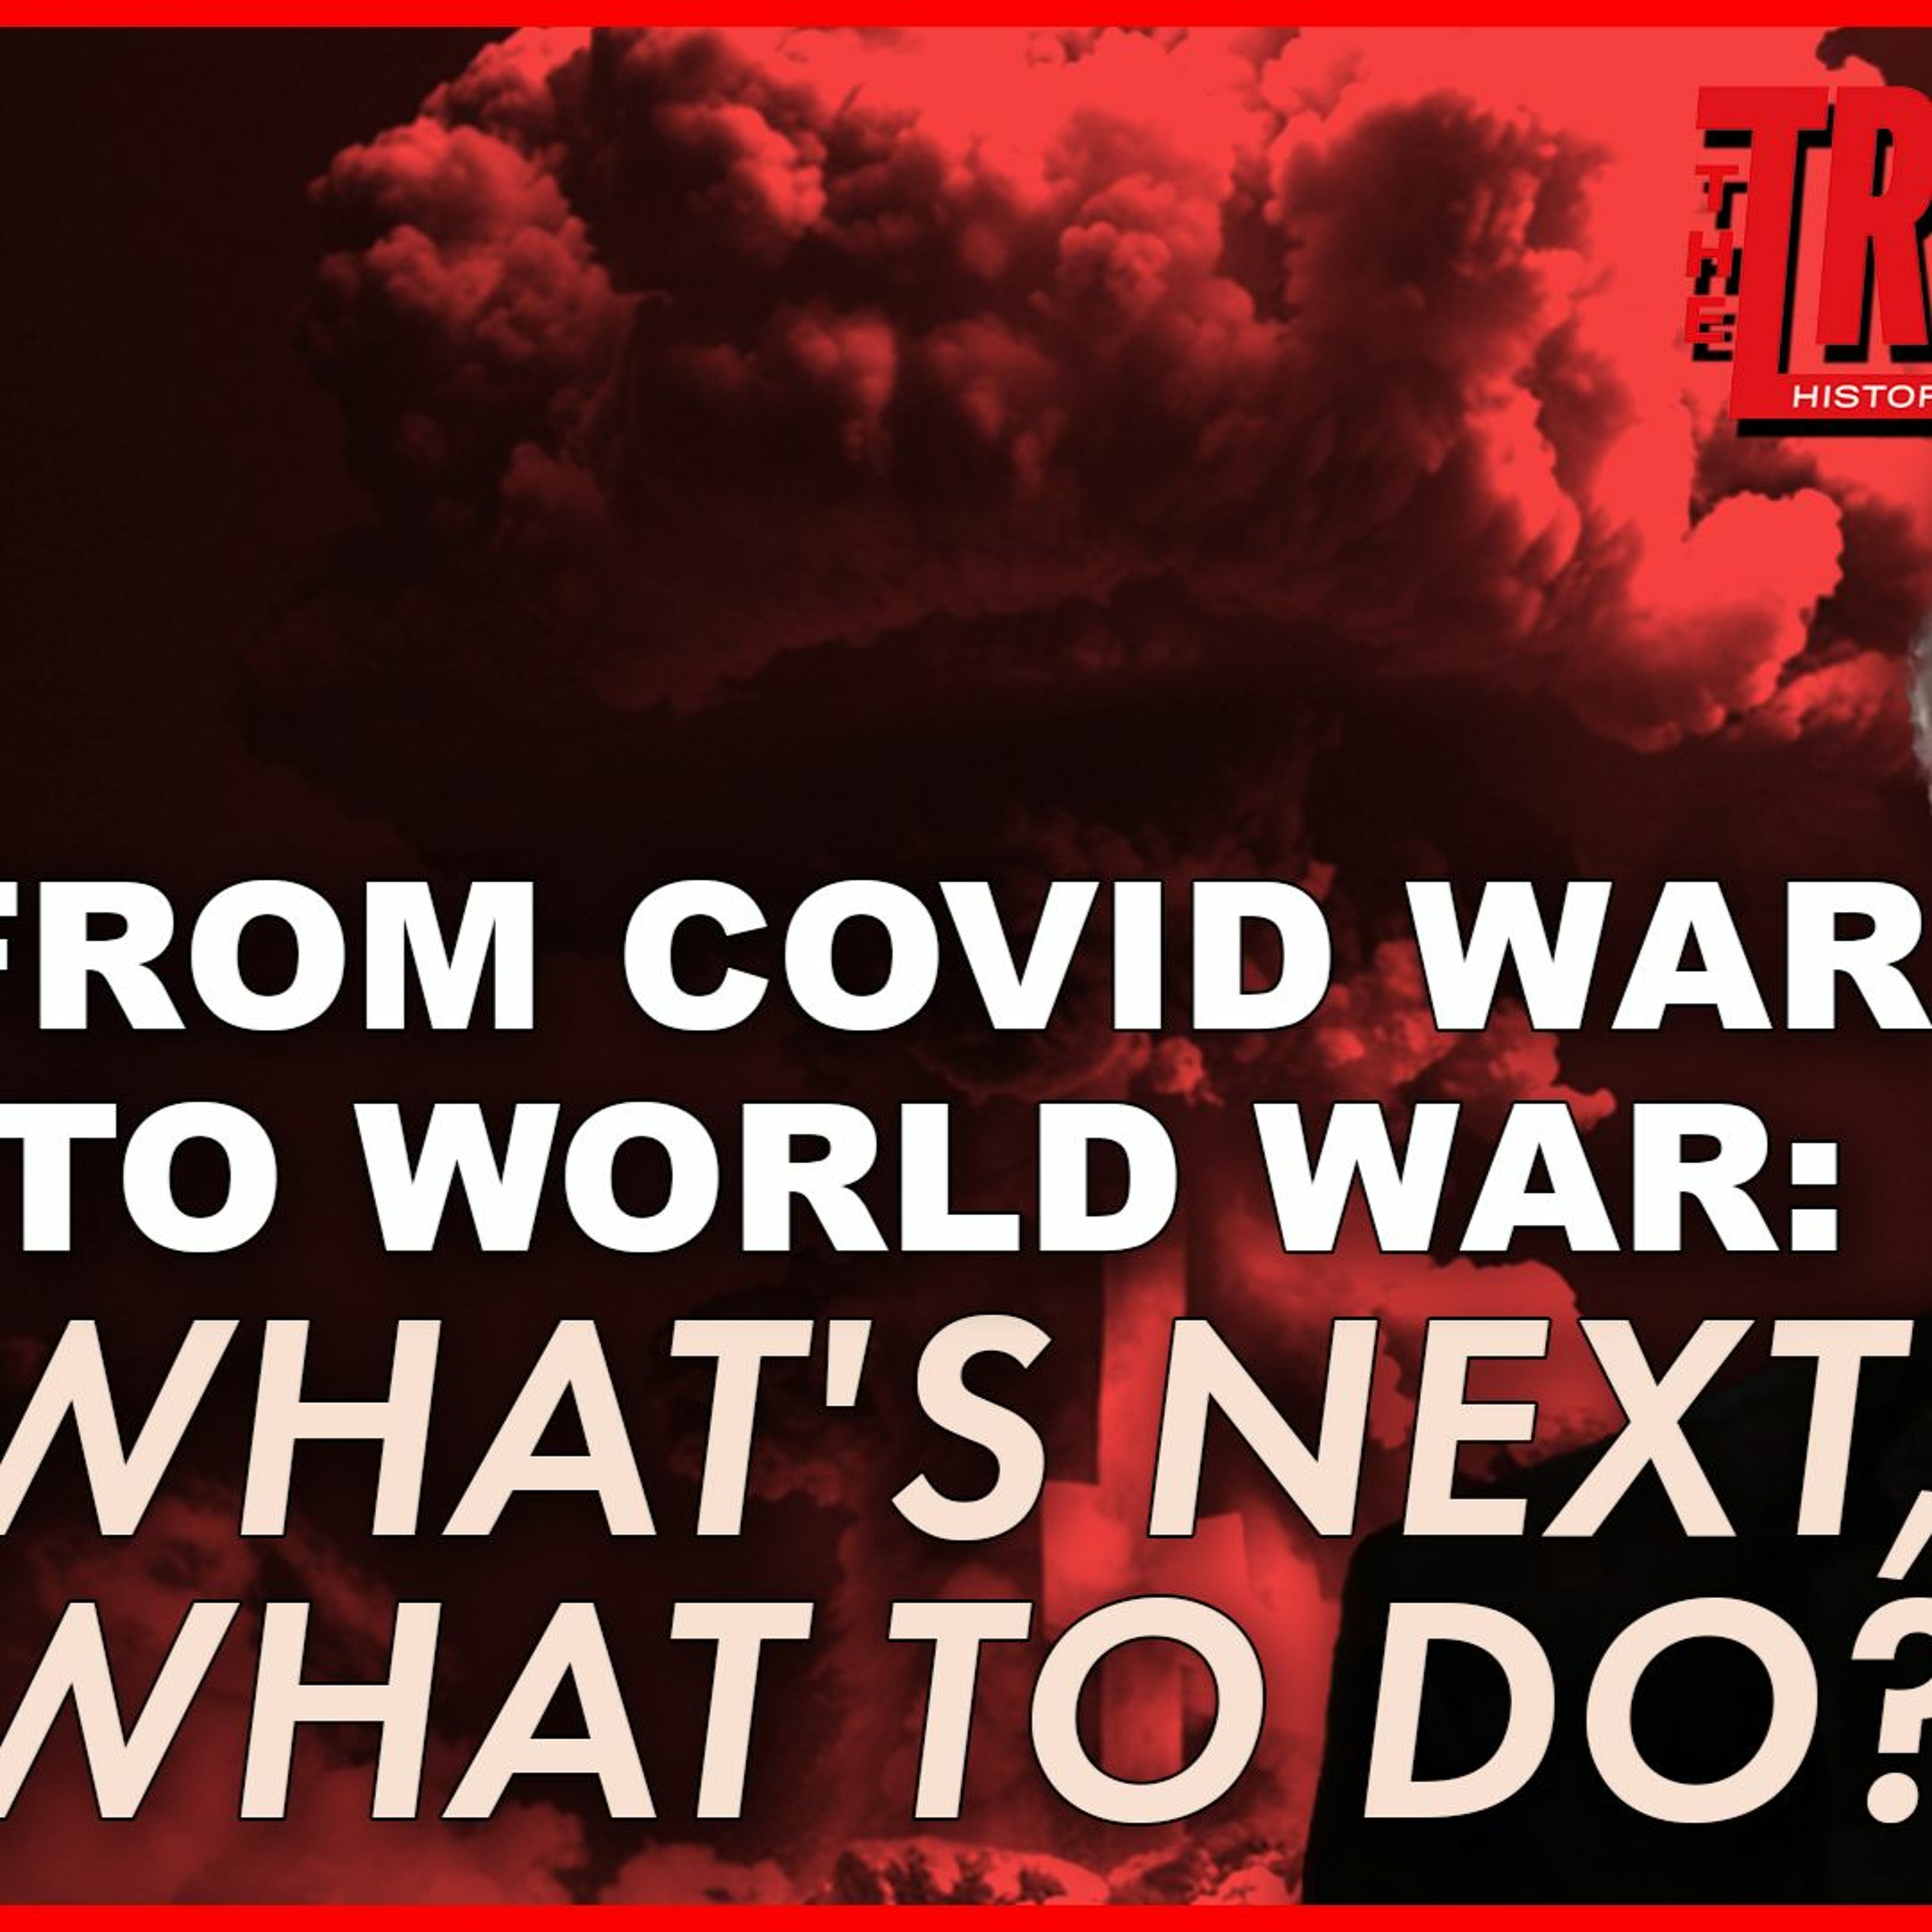 FROM COVID WAR TO WORLD WAR: WHAT'S NEXT, WHAT TO DO?